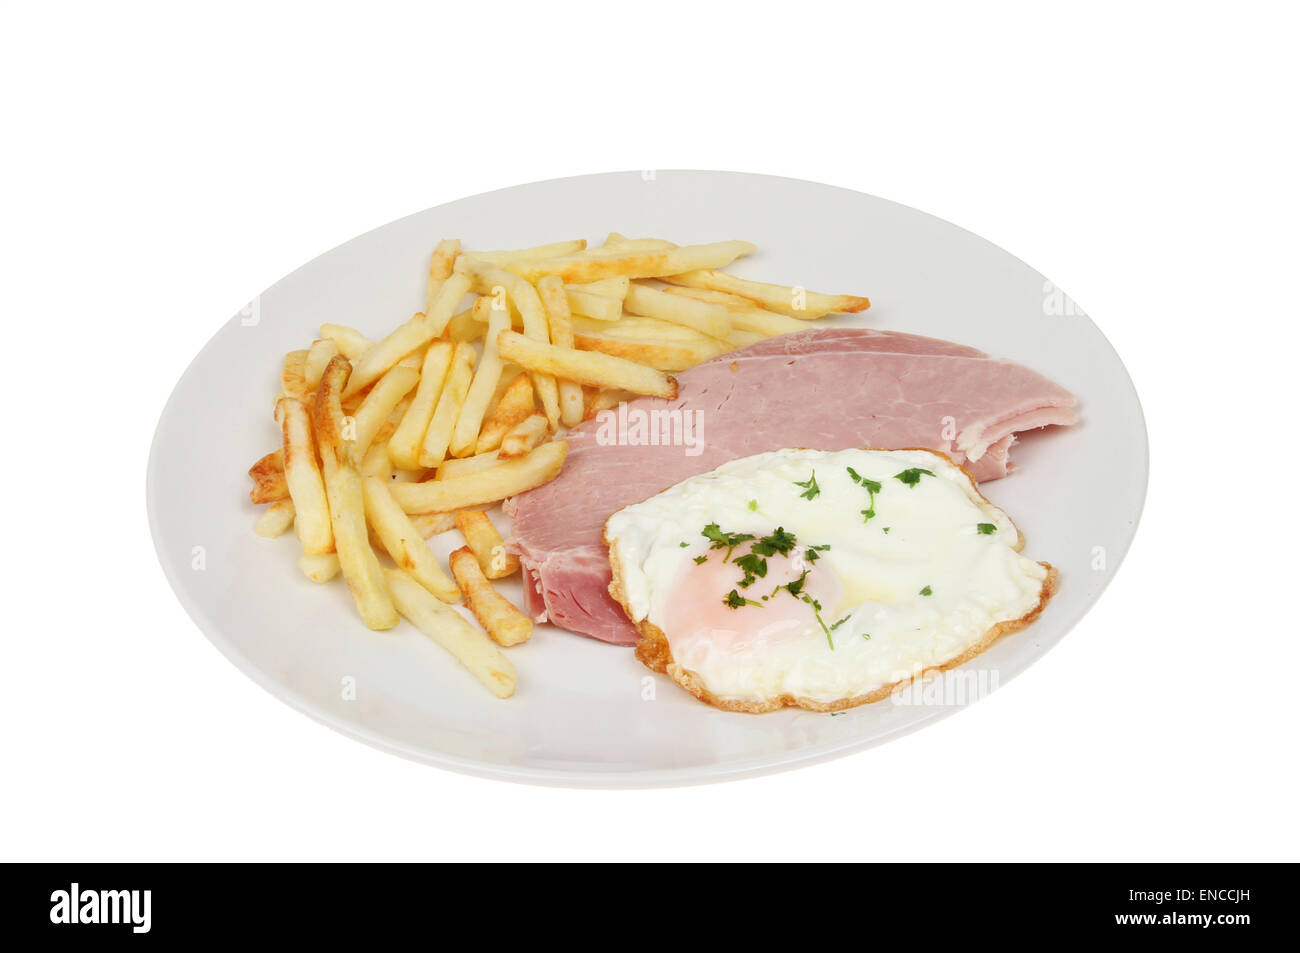 Ham egg and chips on a plate isolated against white Stock Photo